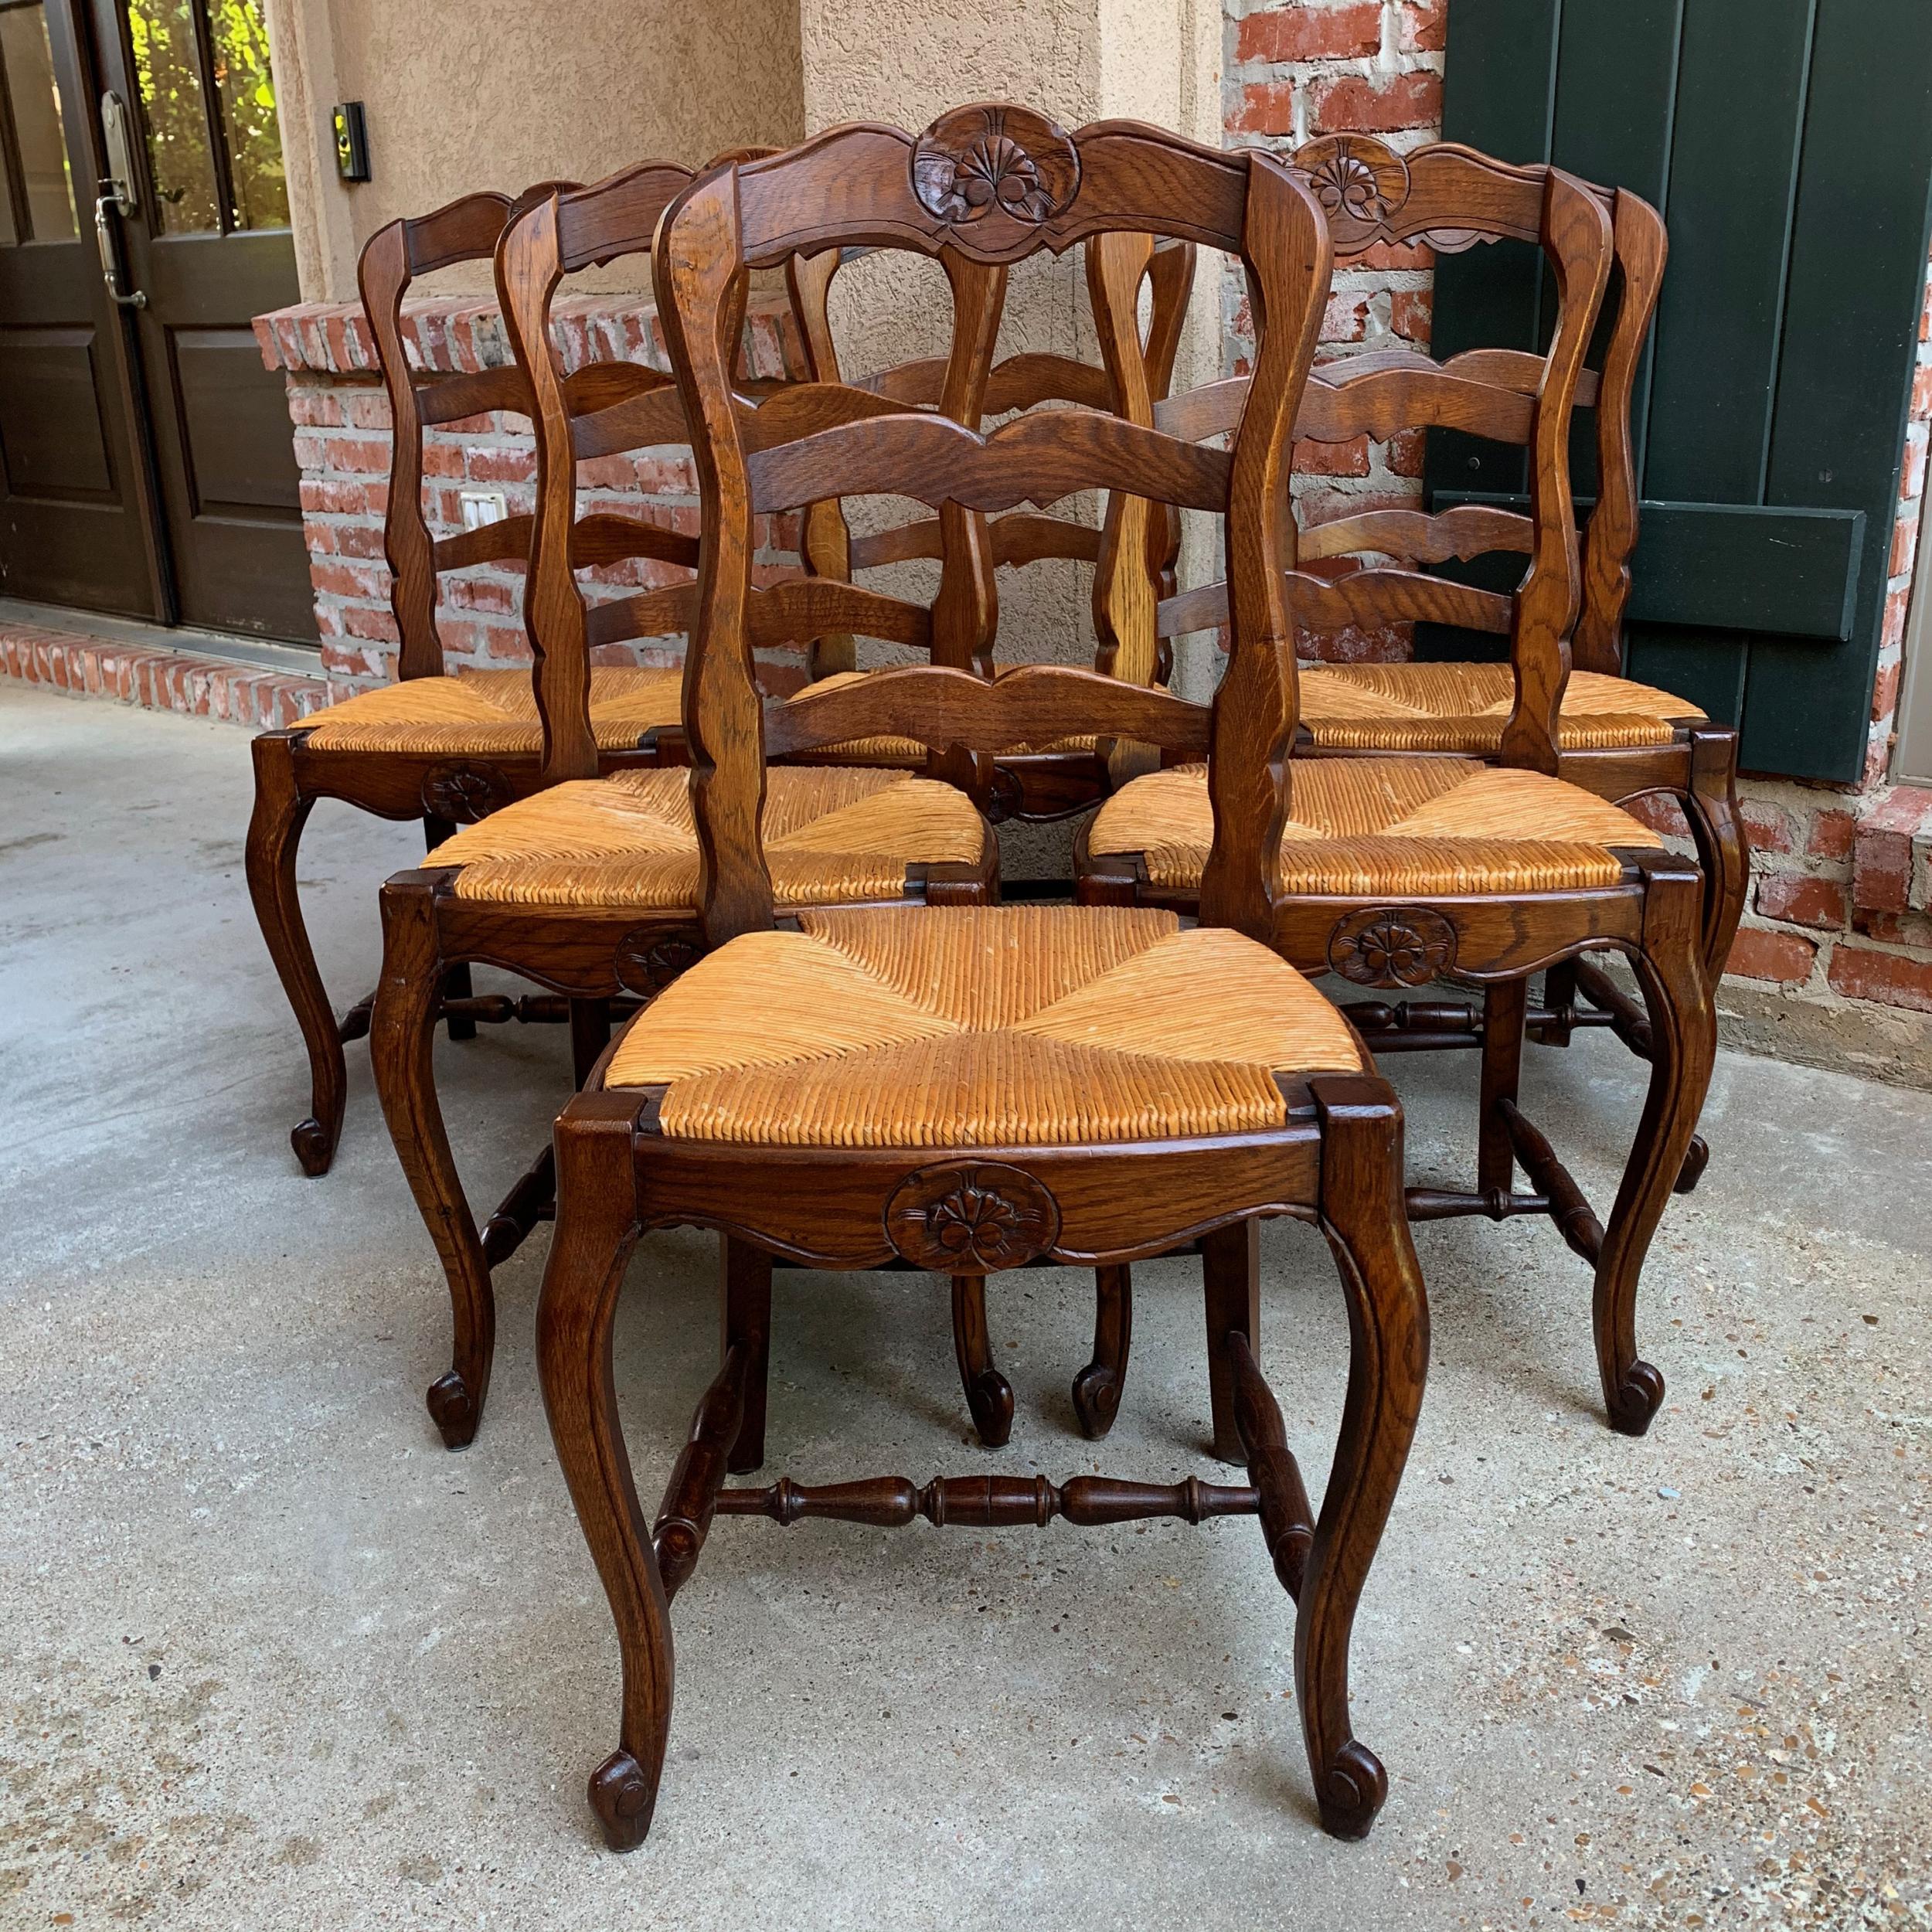 ~Direct from France~
~Lovely set of 6 antique French chairs, with classic French style… perfect for a kitchen or dining room with their original finish that compliments any decor!~
~Serpentine ladder backs with a lovely silhouette; rail has a